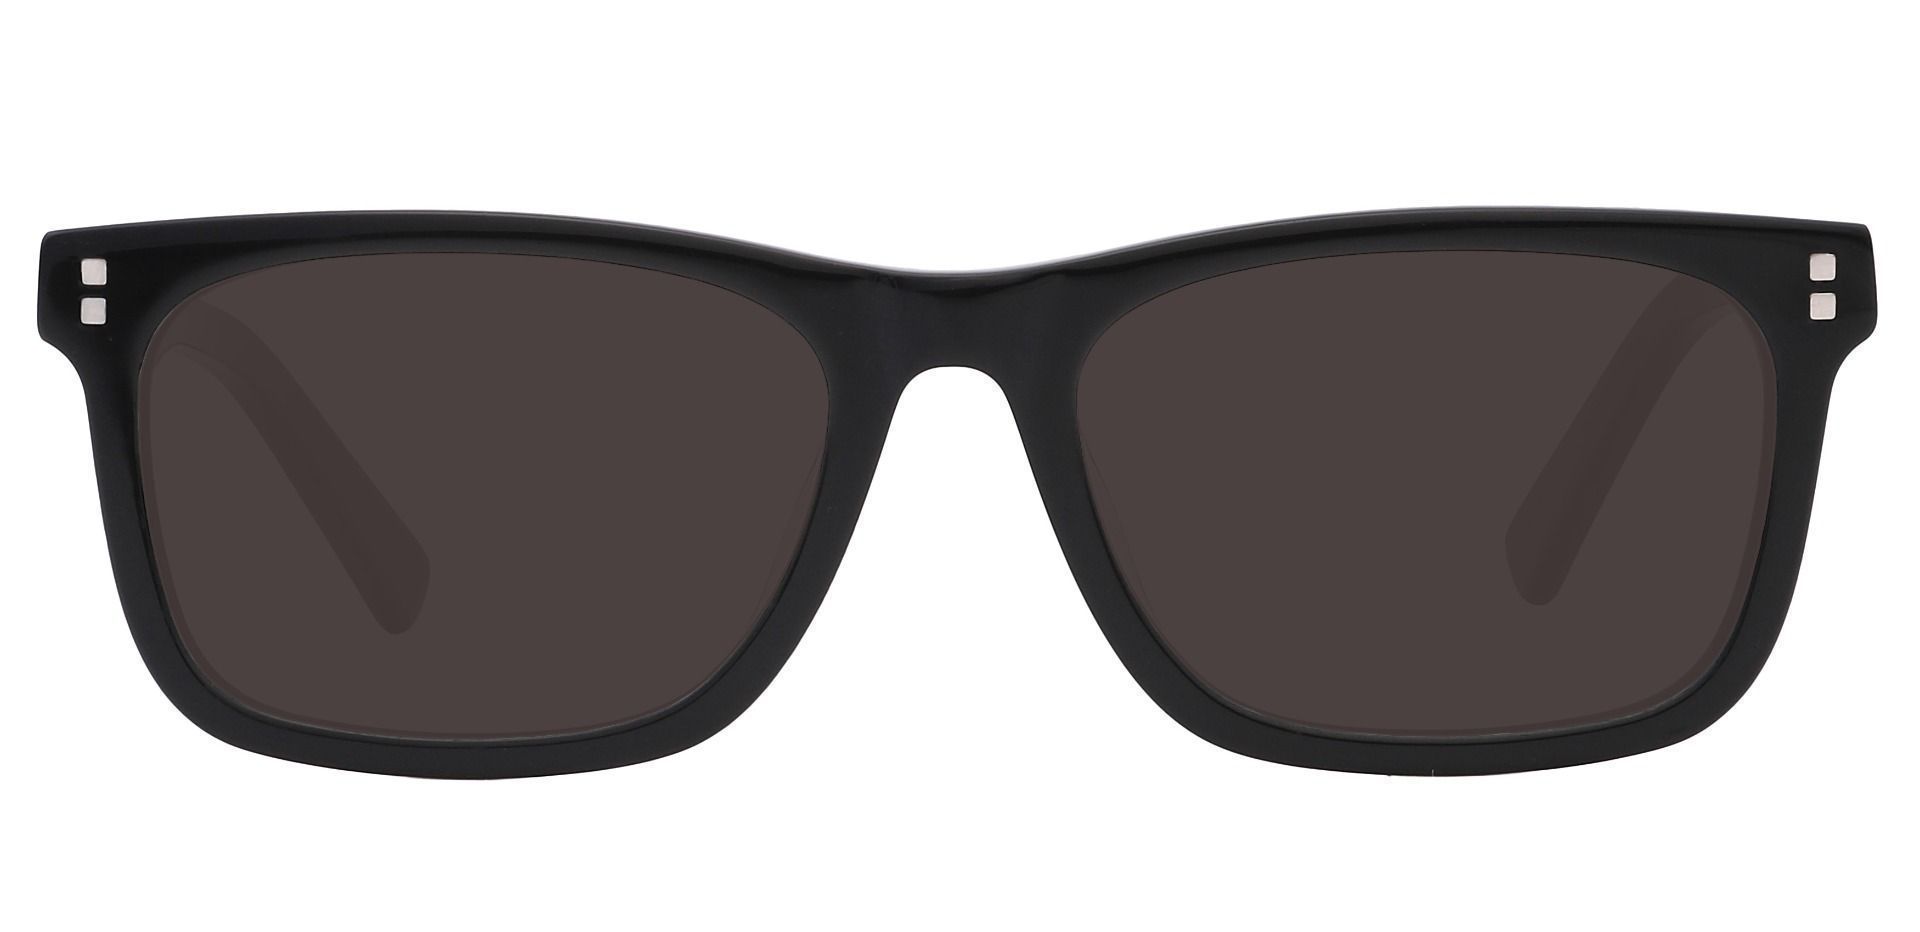 Liberty Rectangle Reading Sunglasses - Black Frame With Gray Lenses